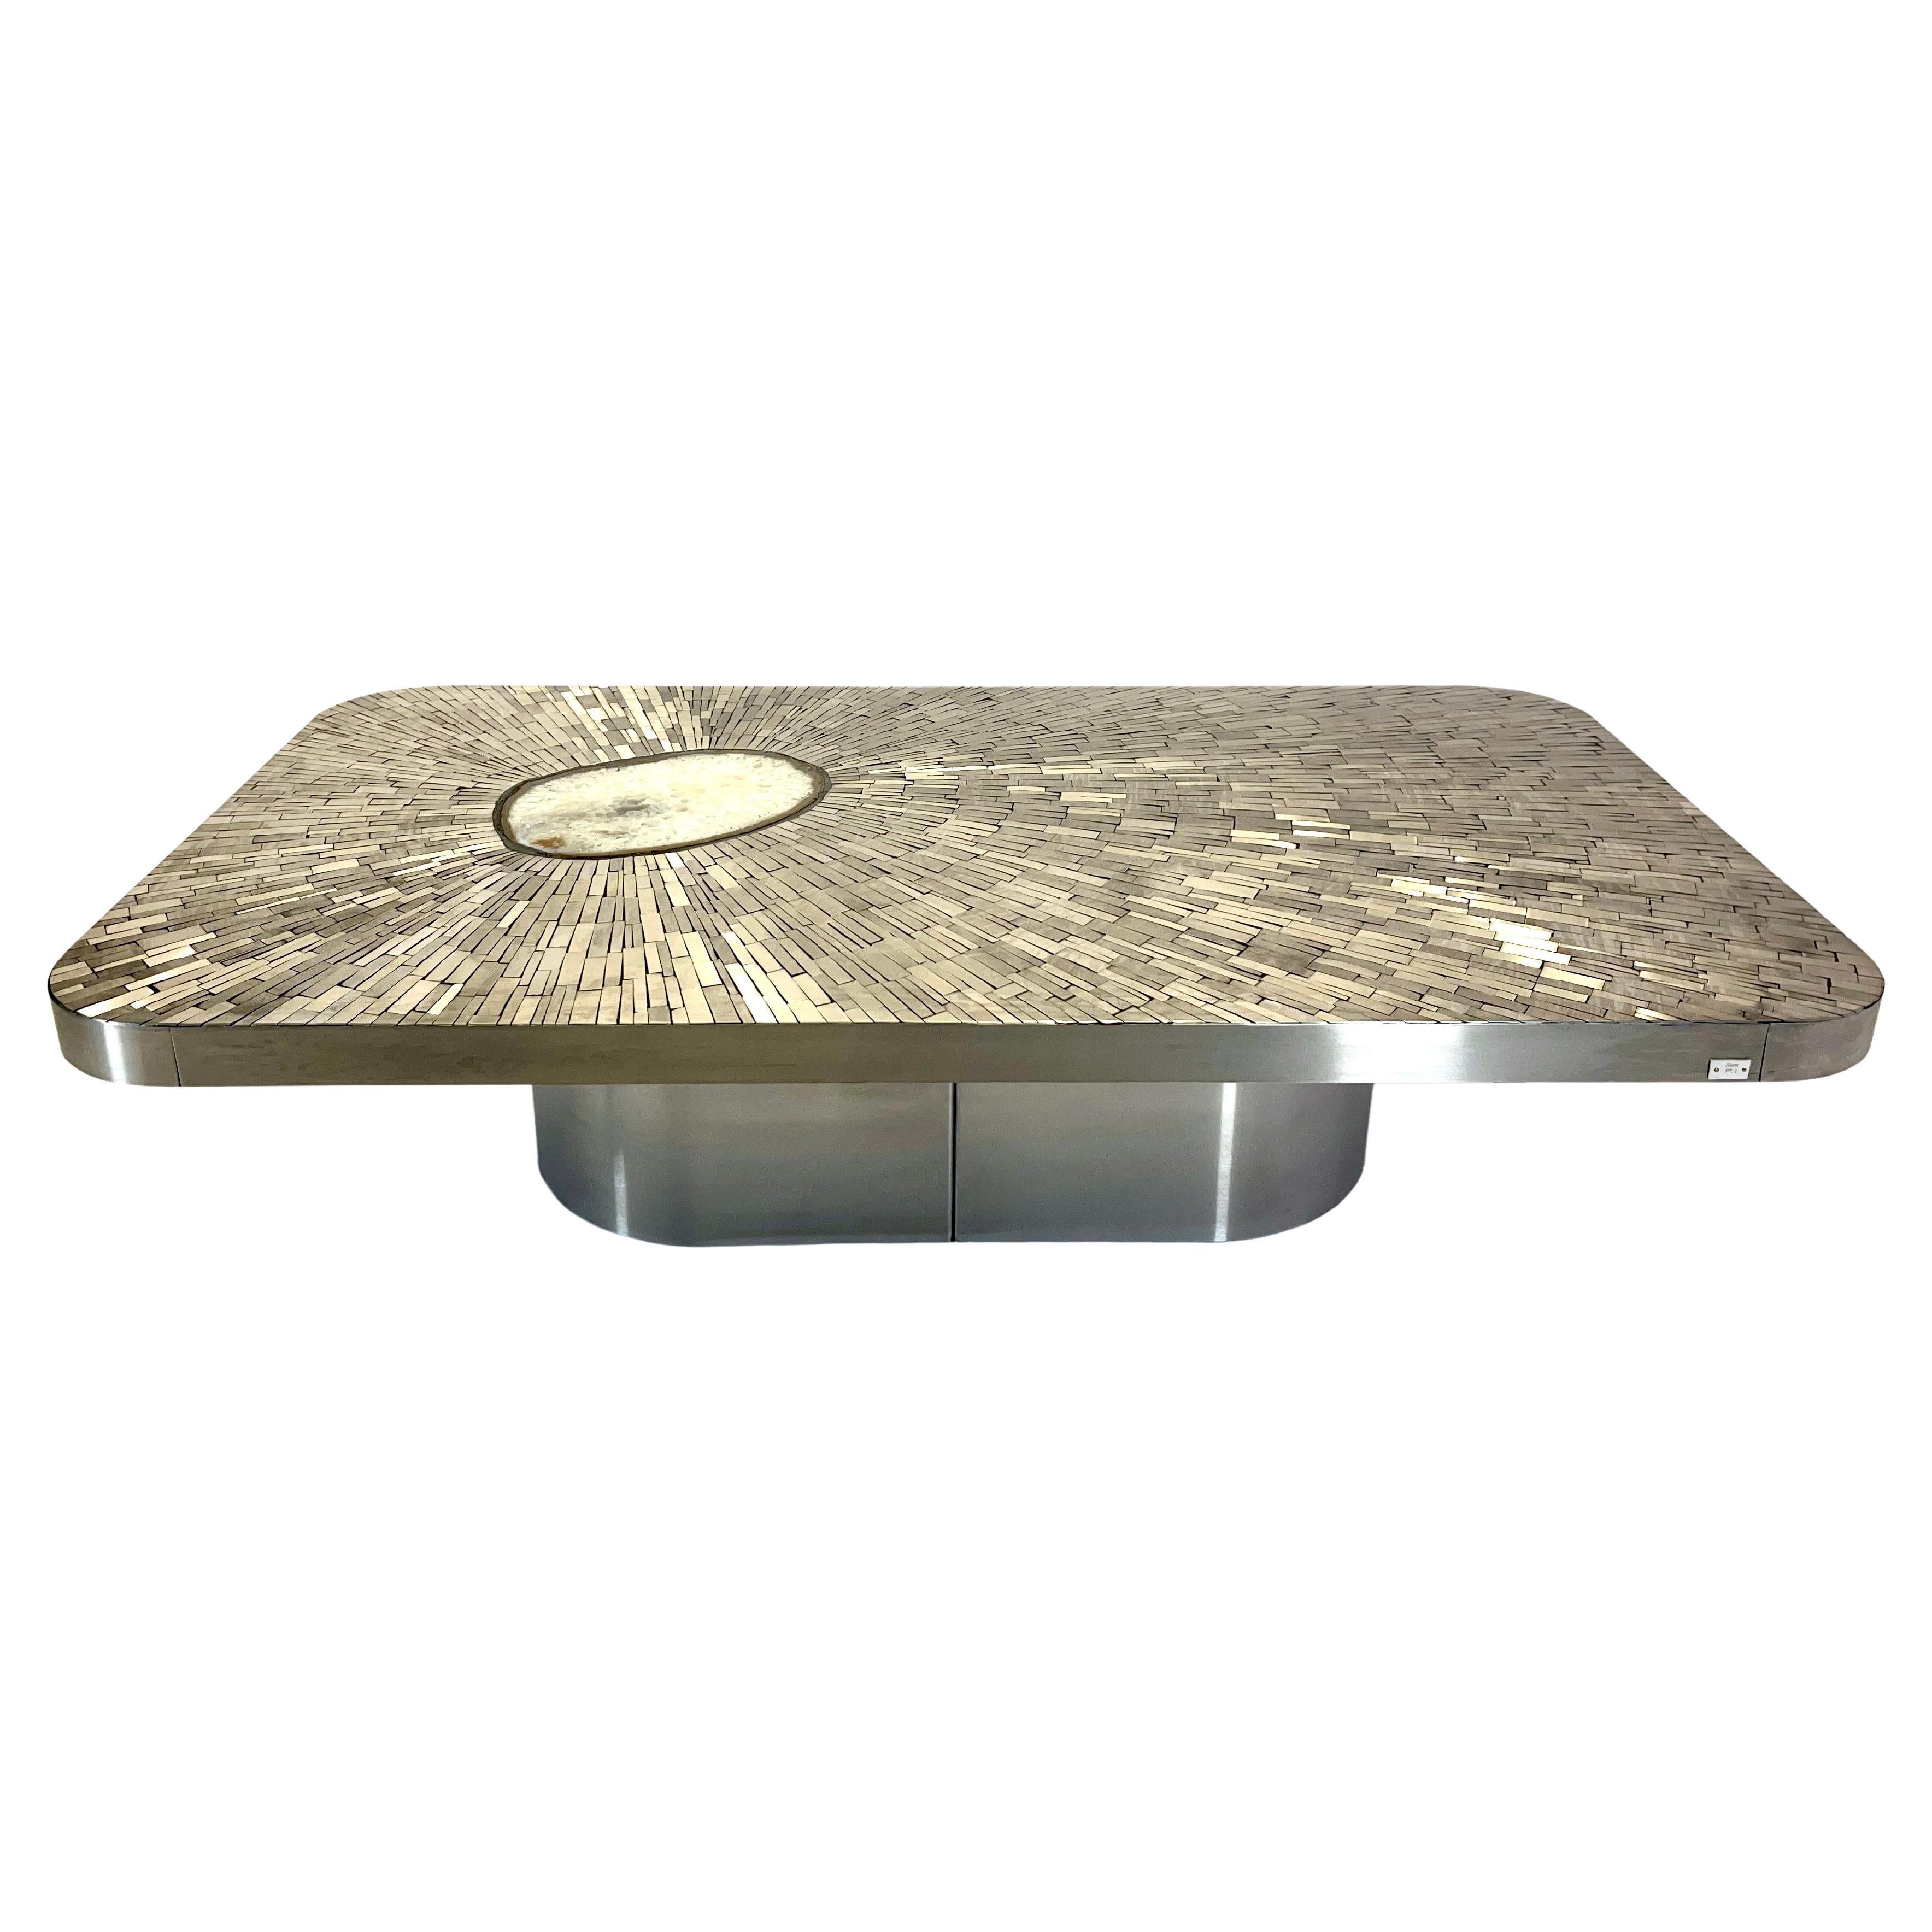 Coffee table mosaic stainless steel by Stan UIsel